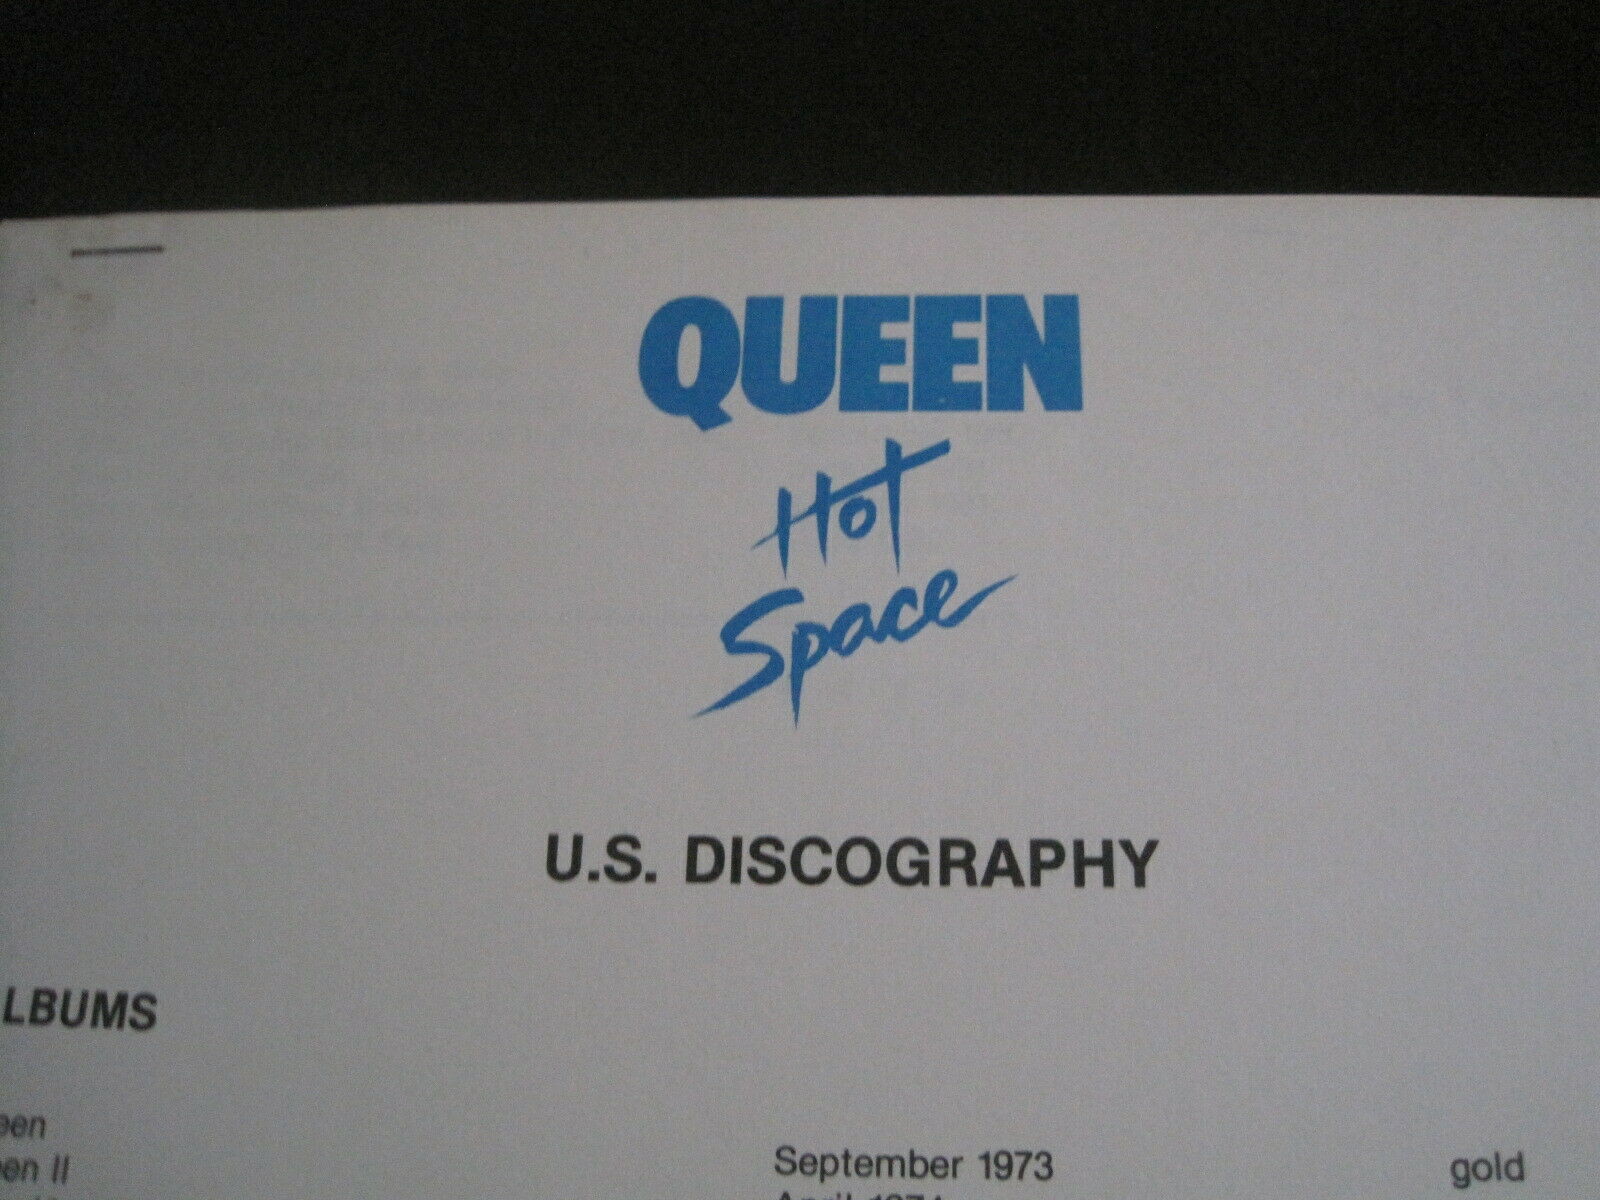 Queen Hot Space 1982 Lp Promotional Us Discography Press Kit Brochure Exc Cond!